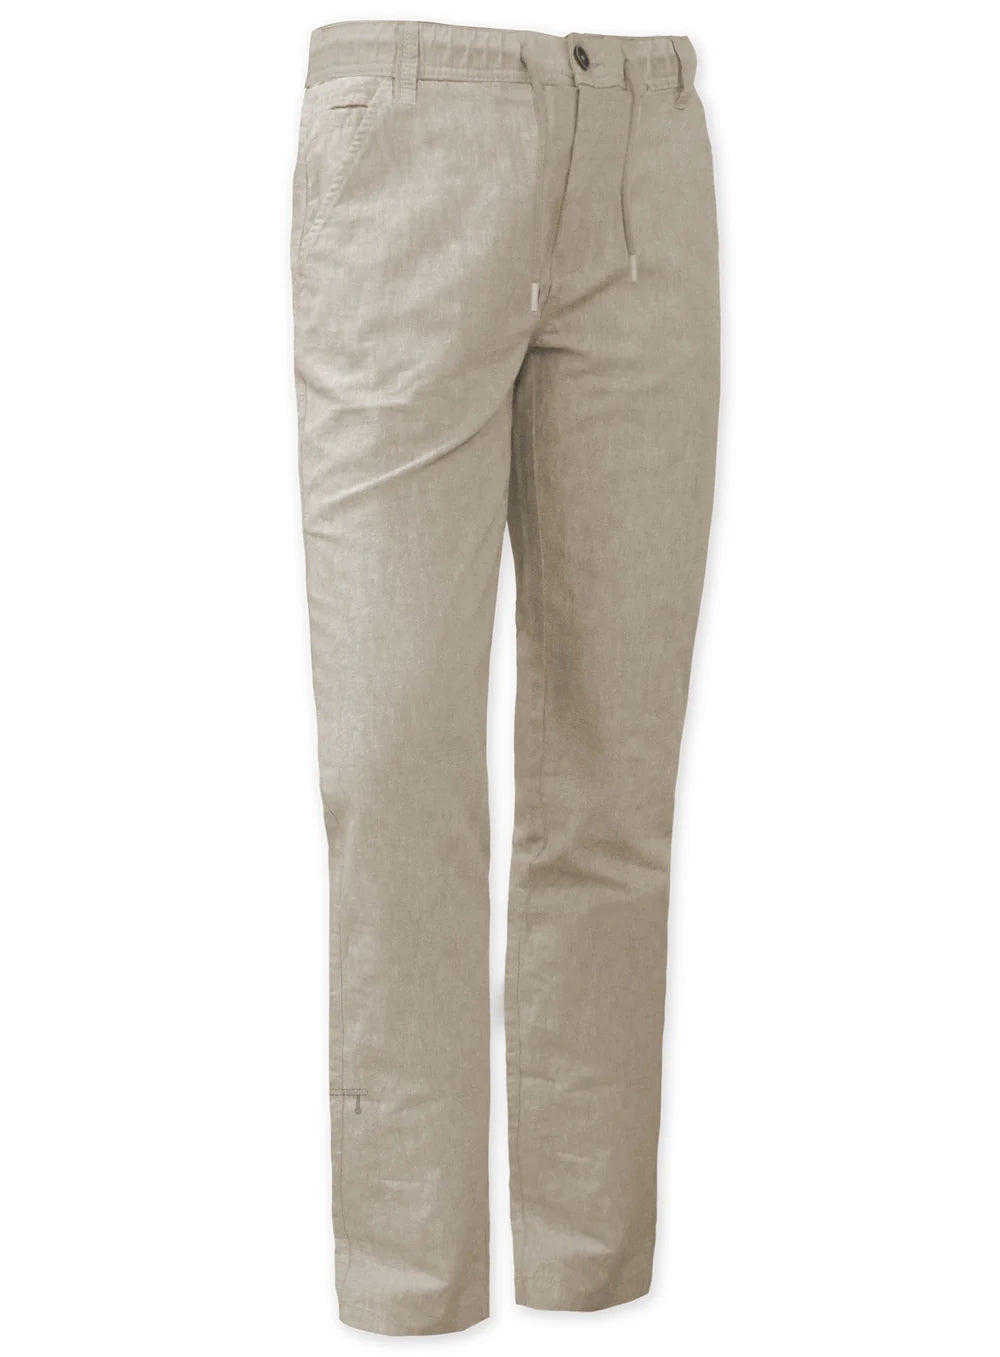 LINEKER LINEN PANT WITH ELASTIC WAISTBAND DRAWCORD